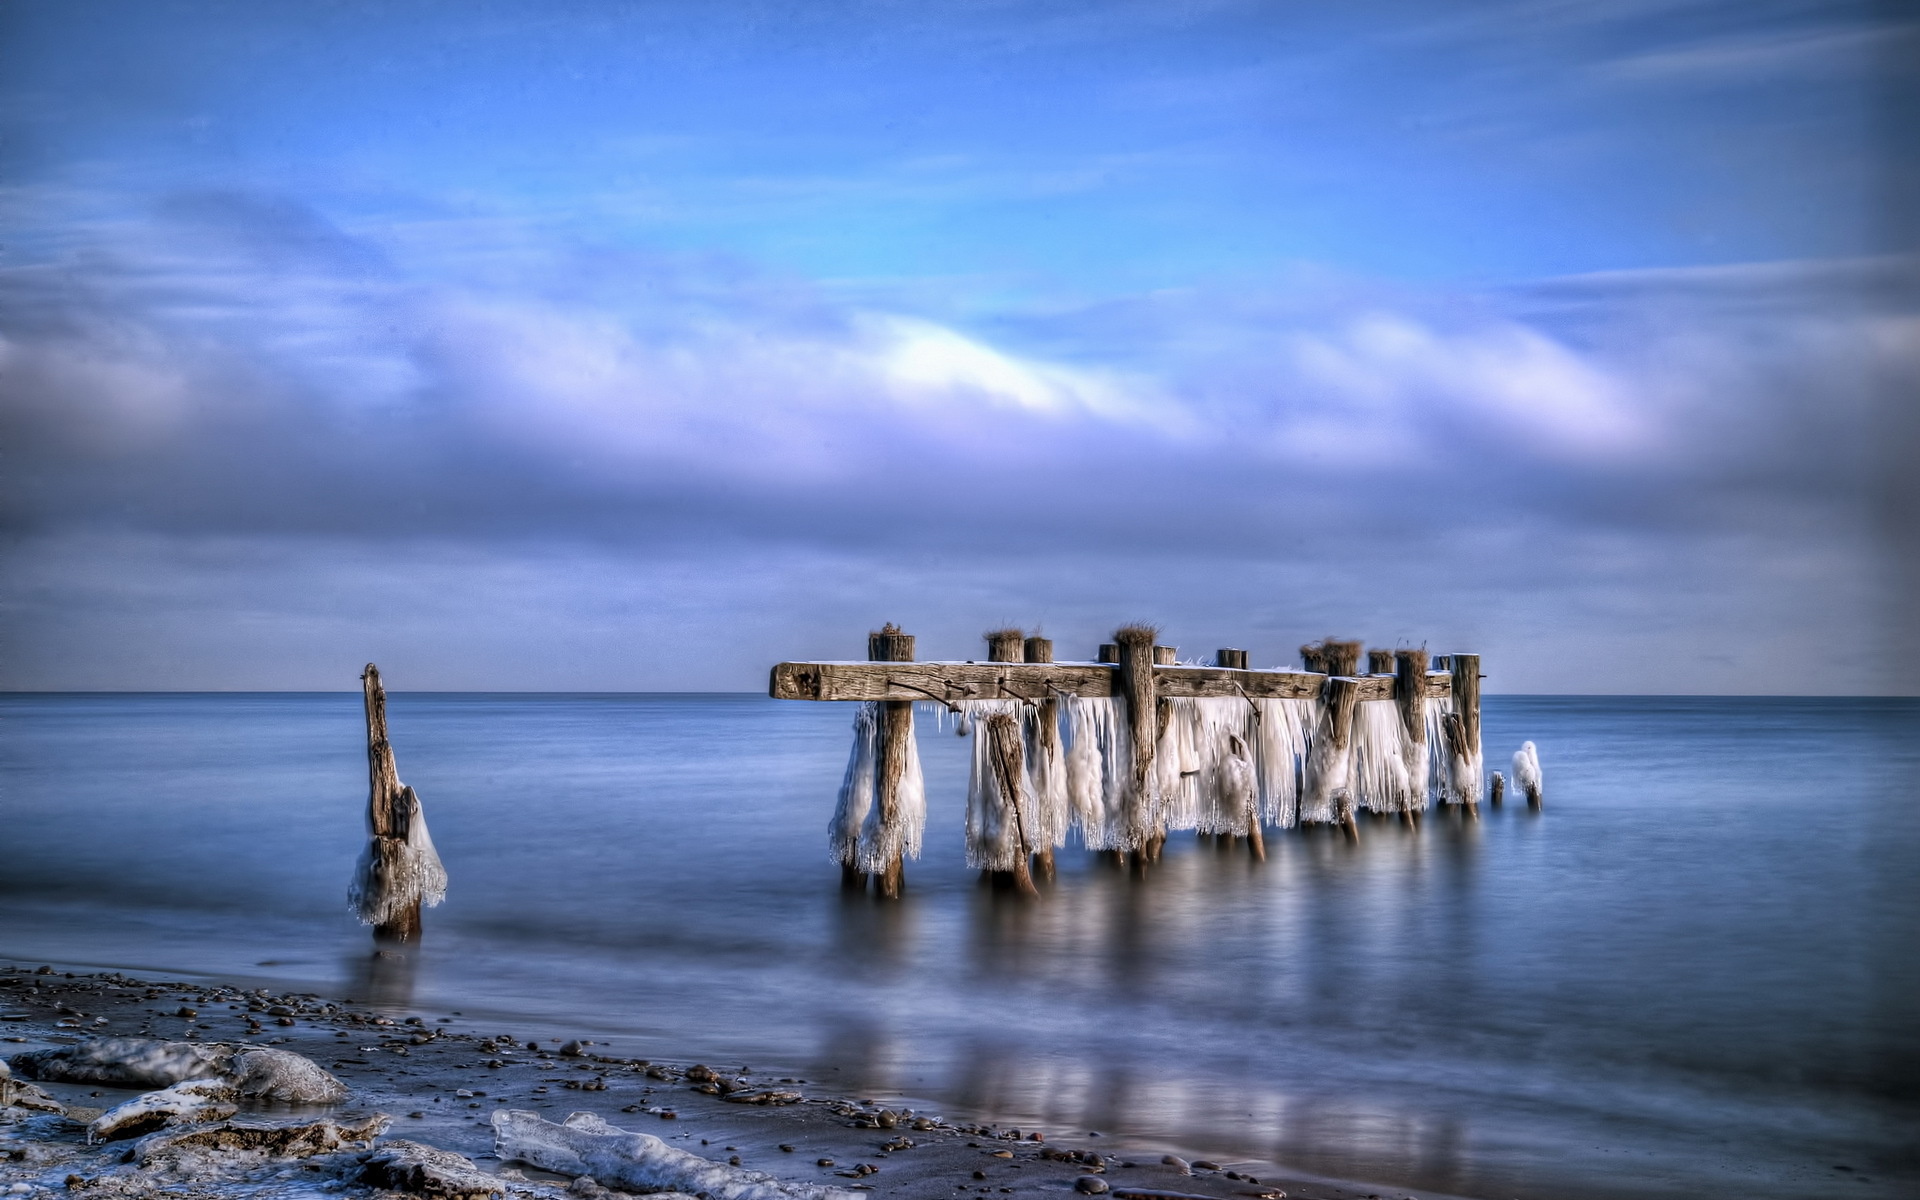 dock, Pier, Decay, Ruins, Nature, Ocean, Sea, Beaches, Winter, Ice, Hdr, Sky, Clouds Wallpaper